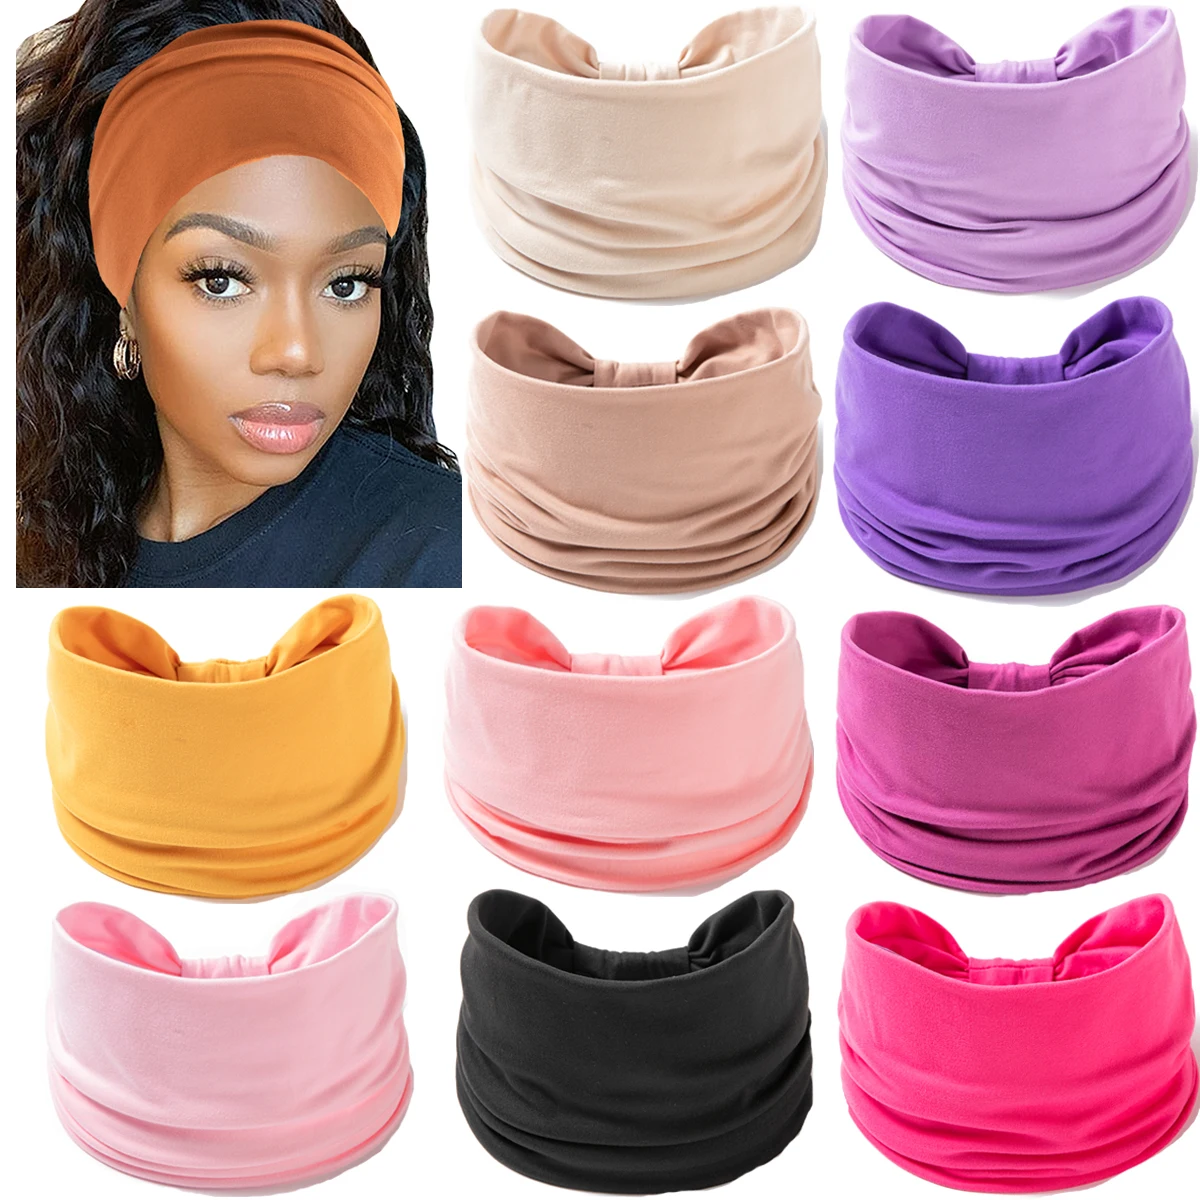 Wide Headband For Women Black Stylish Head Wraps Boho Thick Hairbands Large African Sport Yoga Turban Hair Band Hair Accessories wide non slip sweat headband women head wraps boho thick hairbands large african sport yoga turban hair band hair accessories